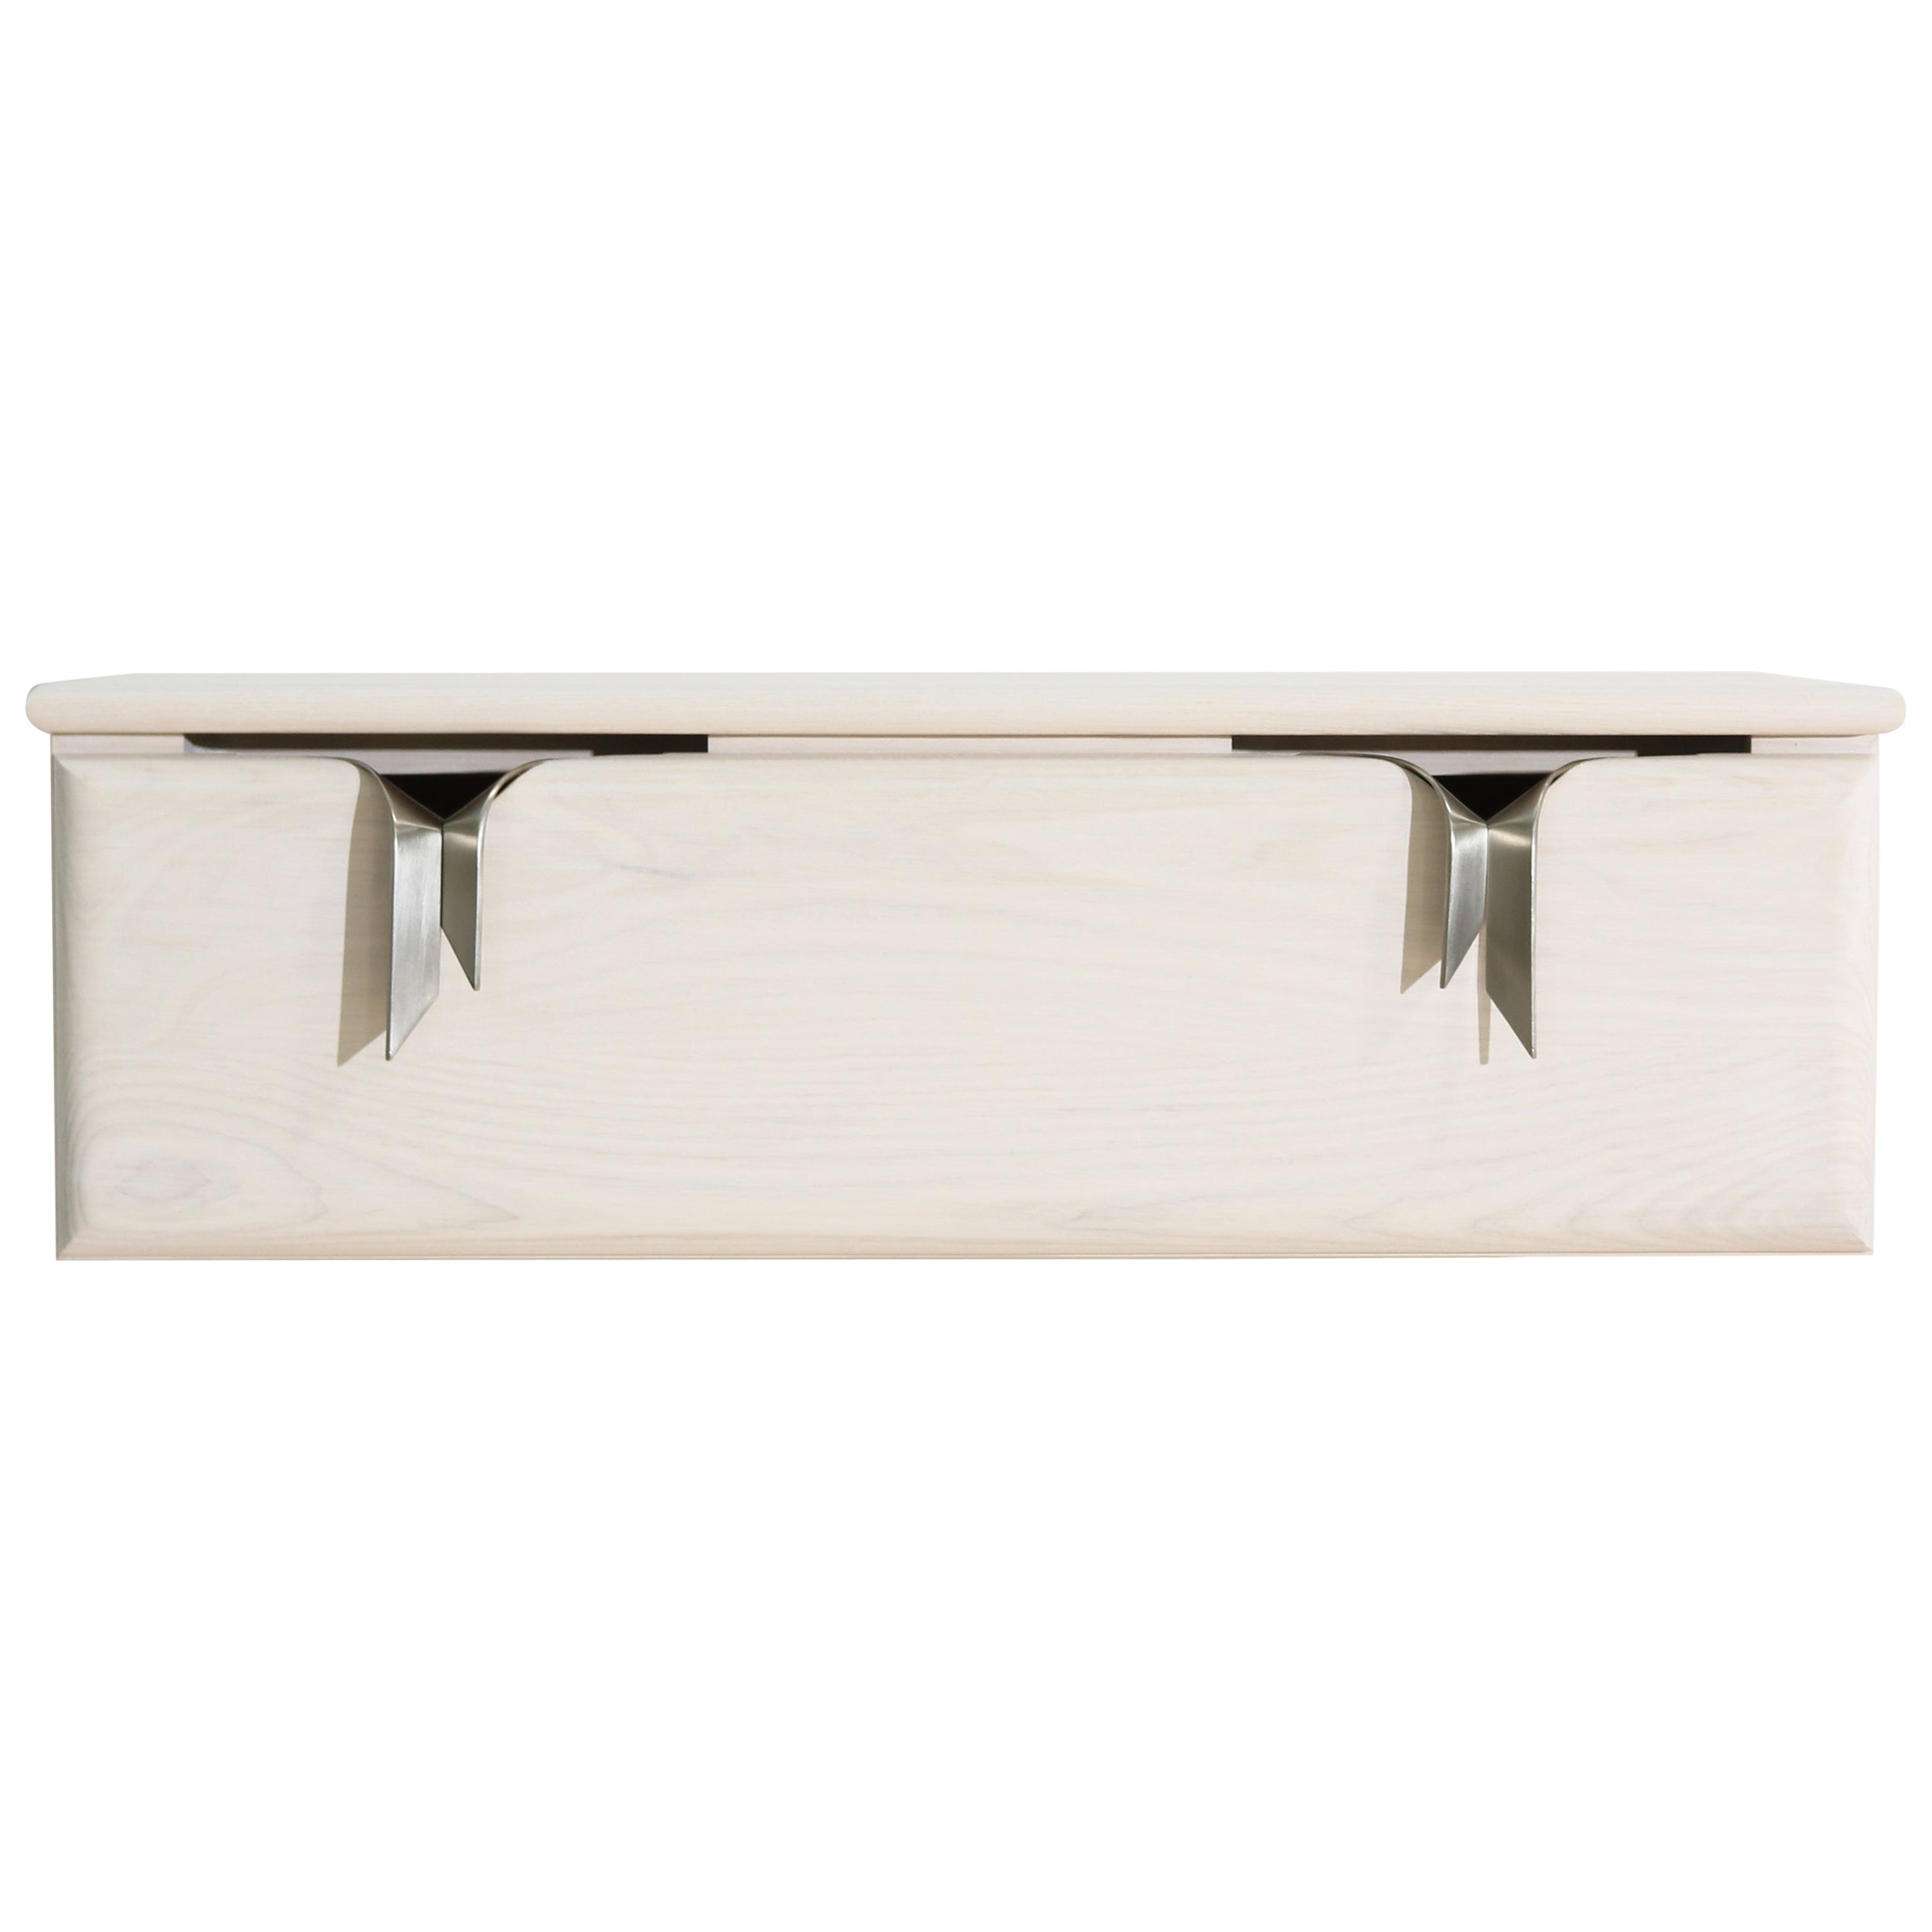 Ribbon Wall Mounted Console Drawer, Ivory Wood, Silver Hardware by Debra Folz